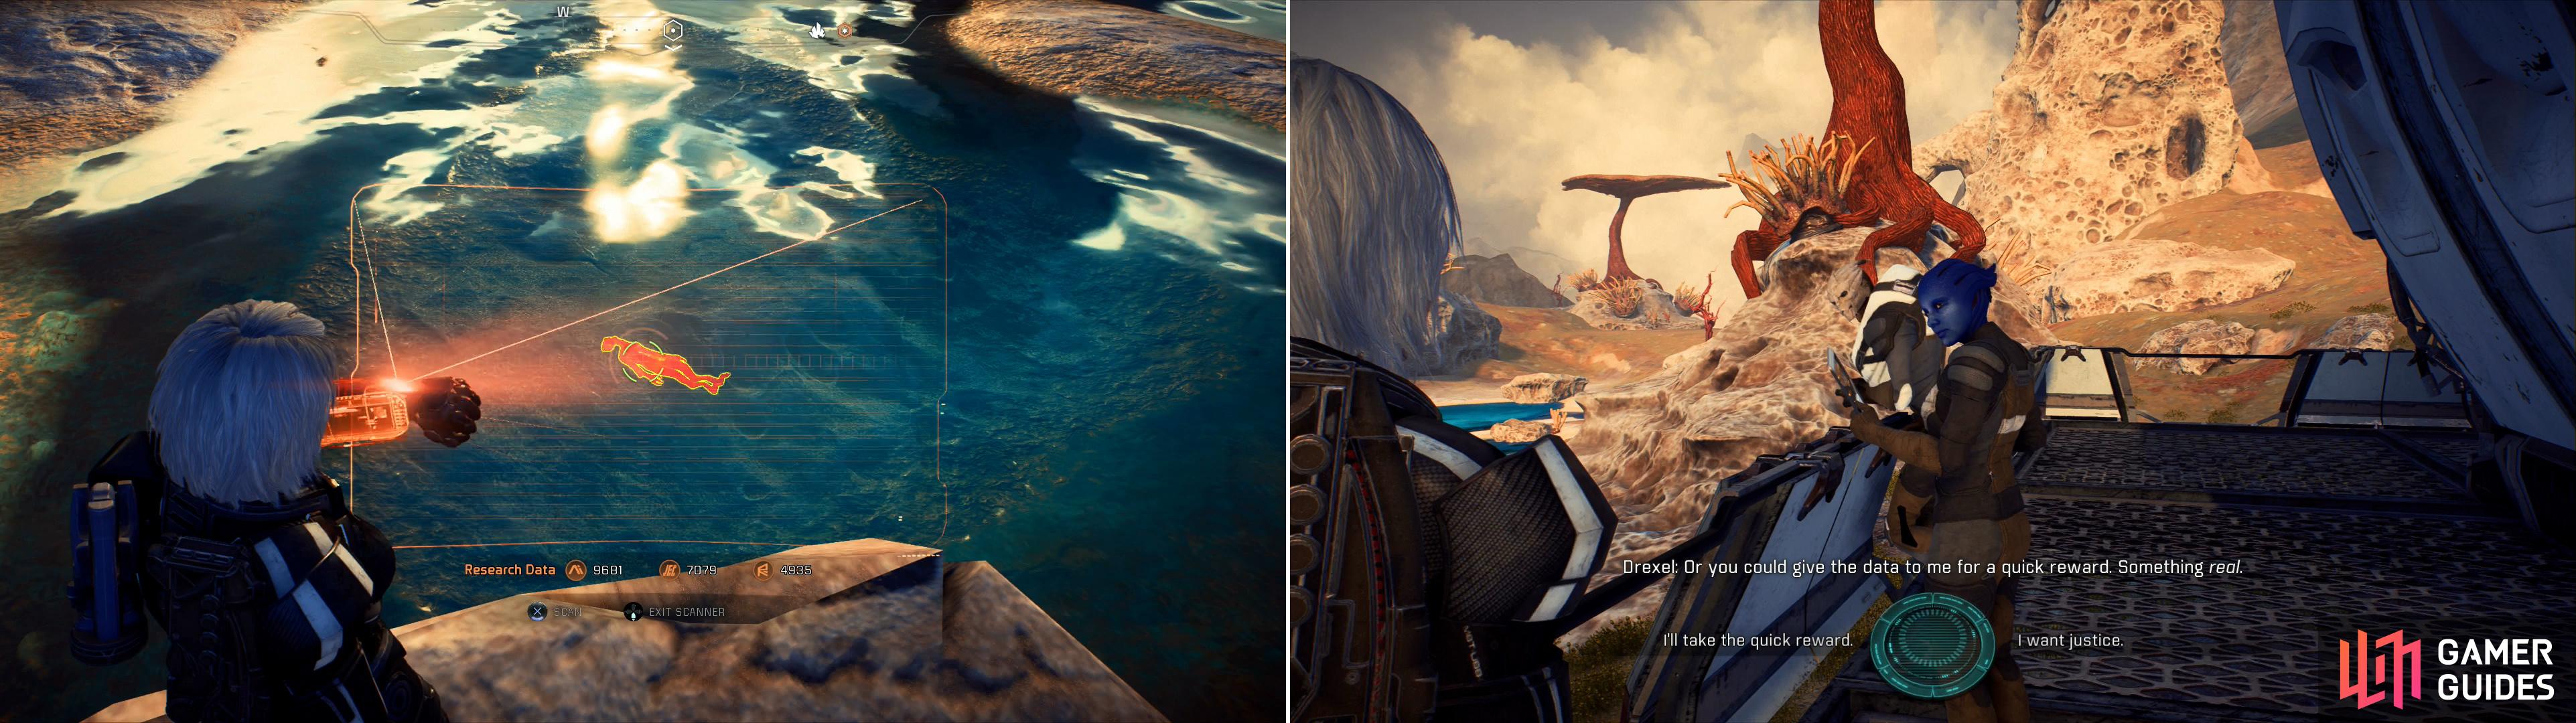 Around Kadara you’ll find various bodies of water, which are being used as convenient dumping grounds for… bodies. Ironic. (left) Scan these bodies and return to Saneris and Drexel and choose between their offers (right).